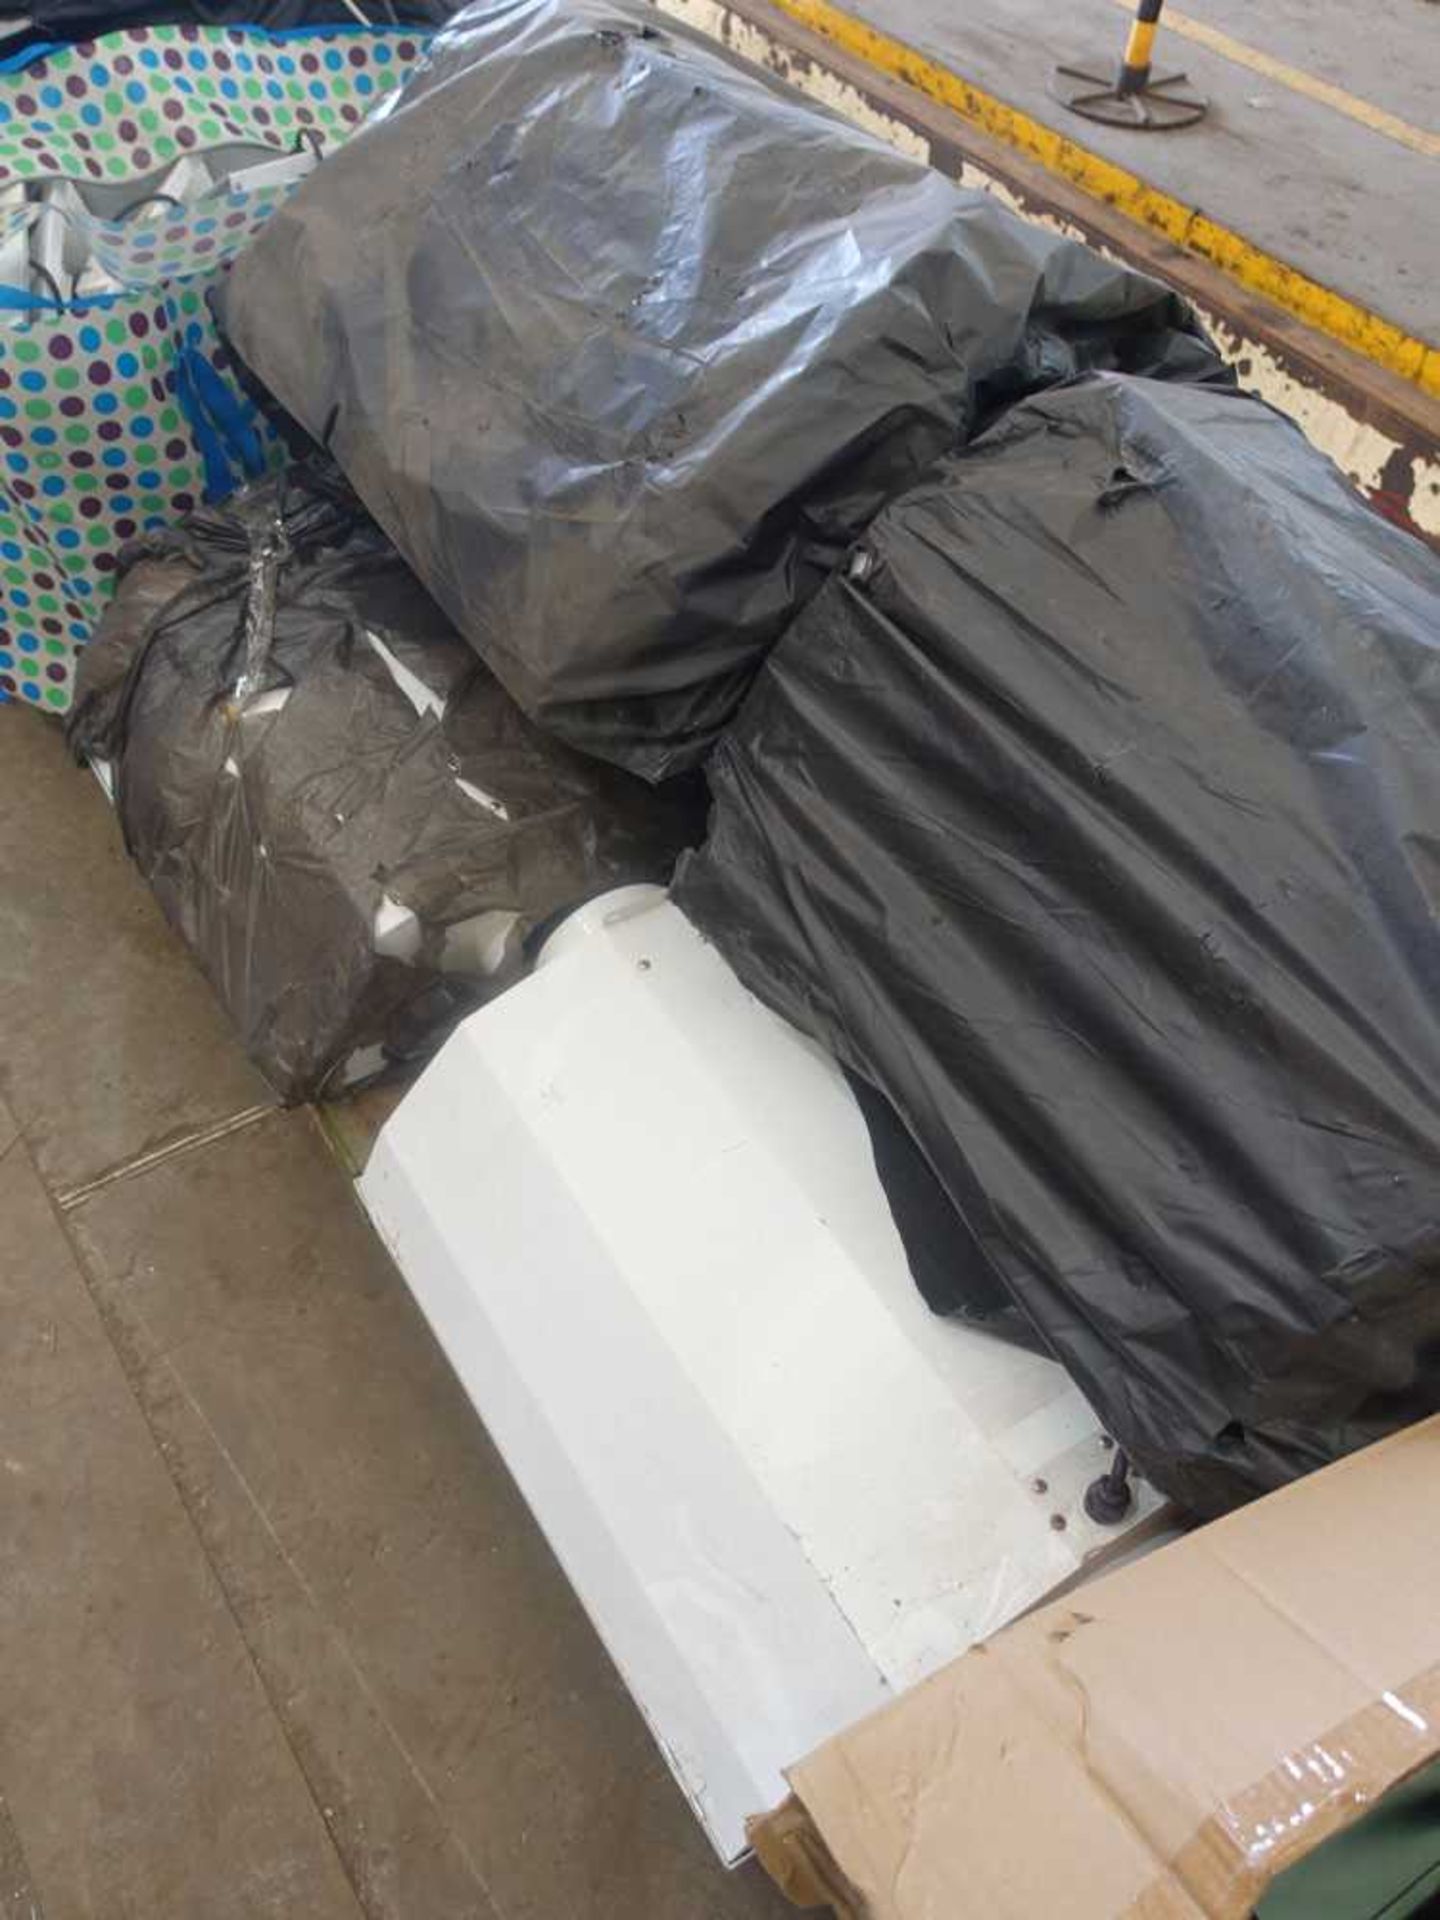 +VAT Twelve pallets containing a large quantity of hydroponics equipment, including netting, - Image 7 of 15